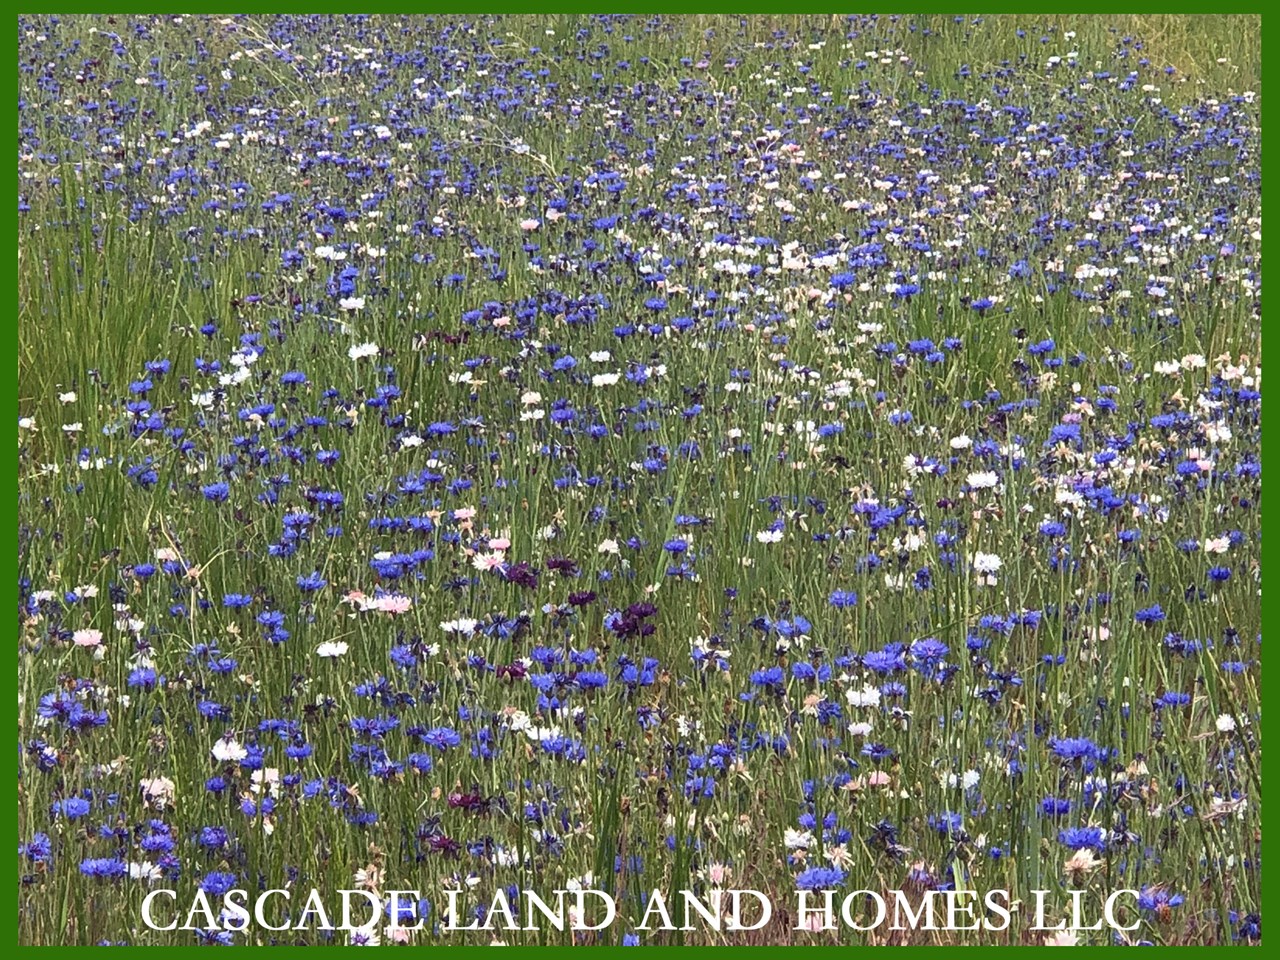 with our late spring rains this year, the entire agency lake area was a blanket of wildflowers! we took this photo during the last week of july!